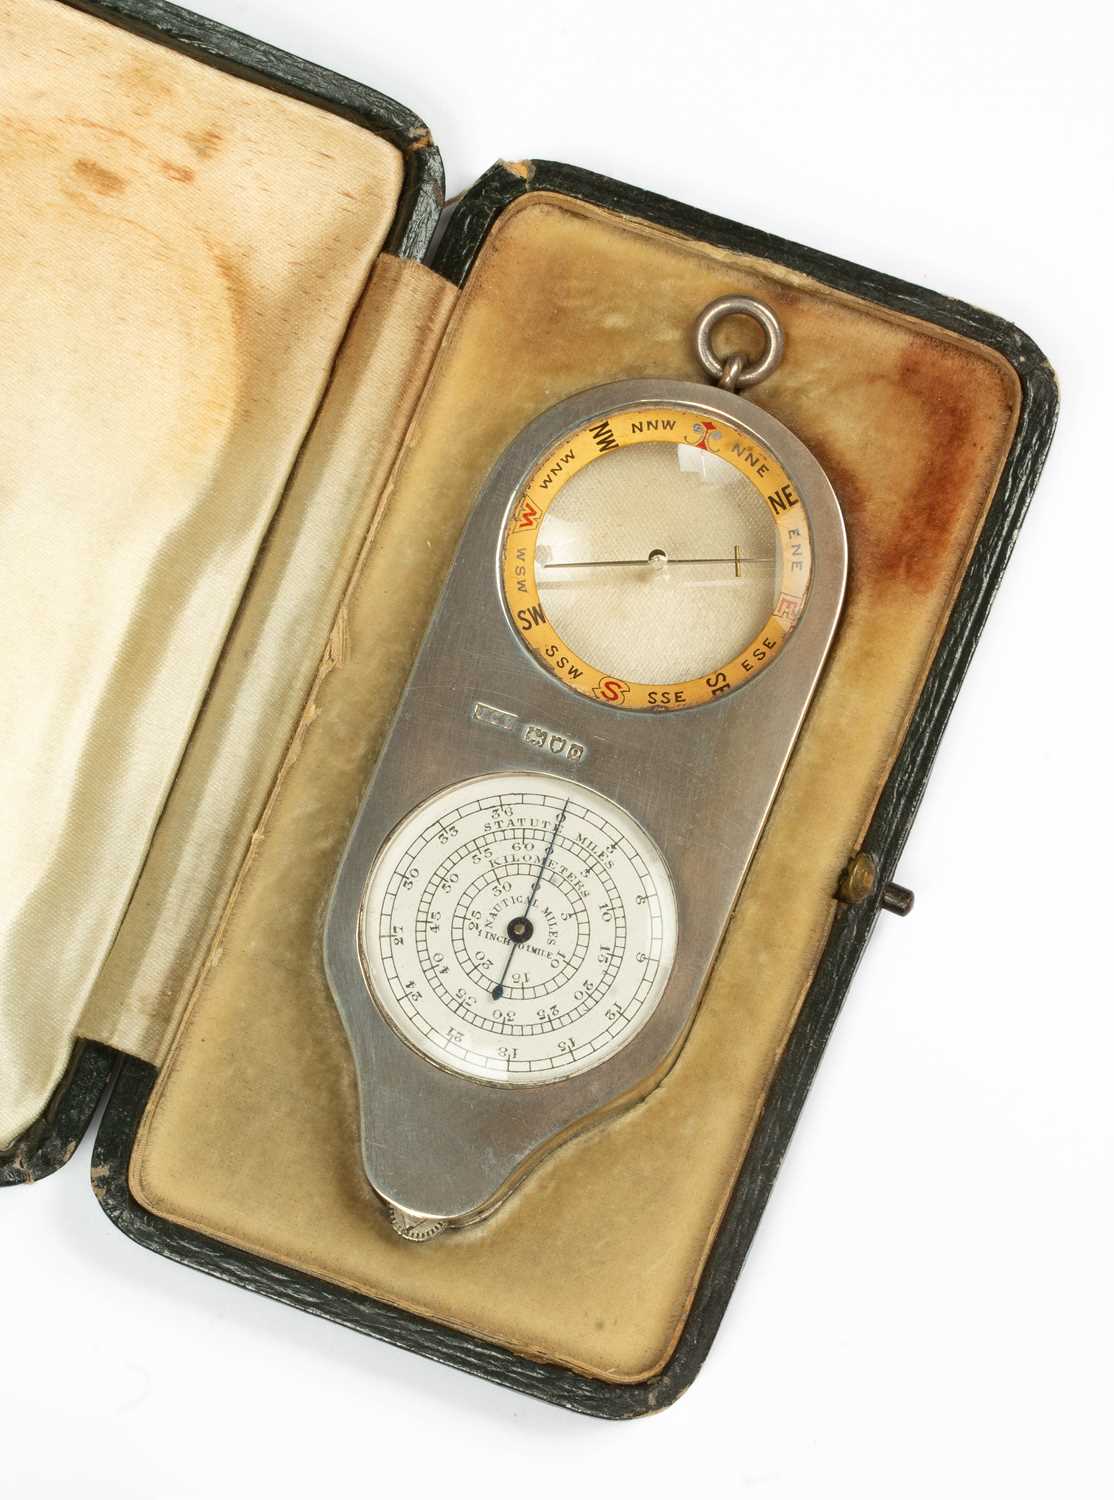 A silver compass and map distance measurer